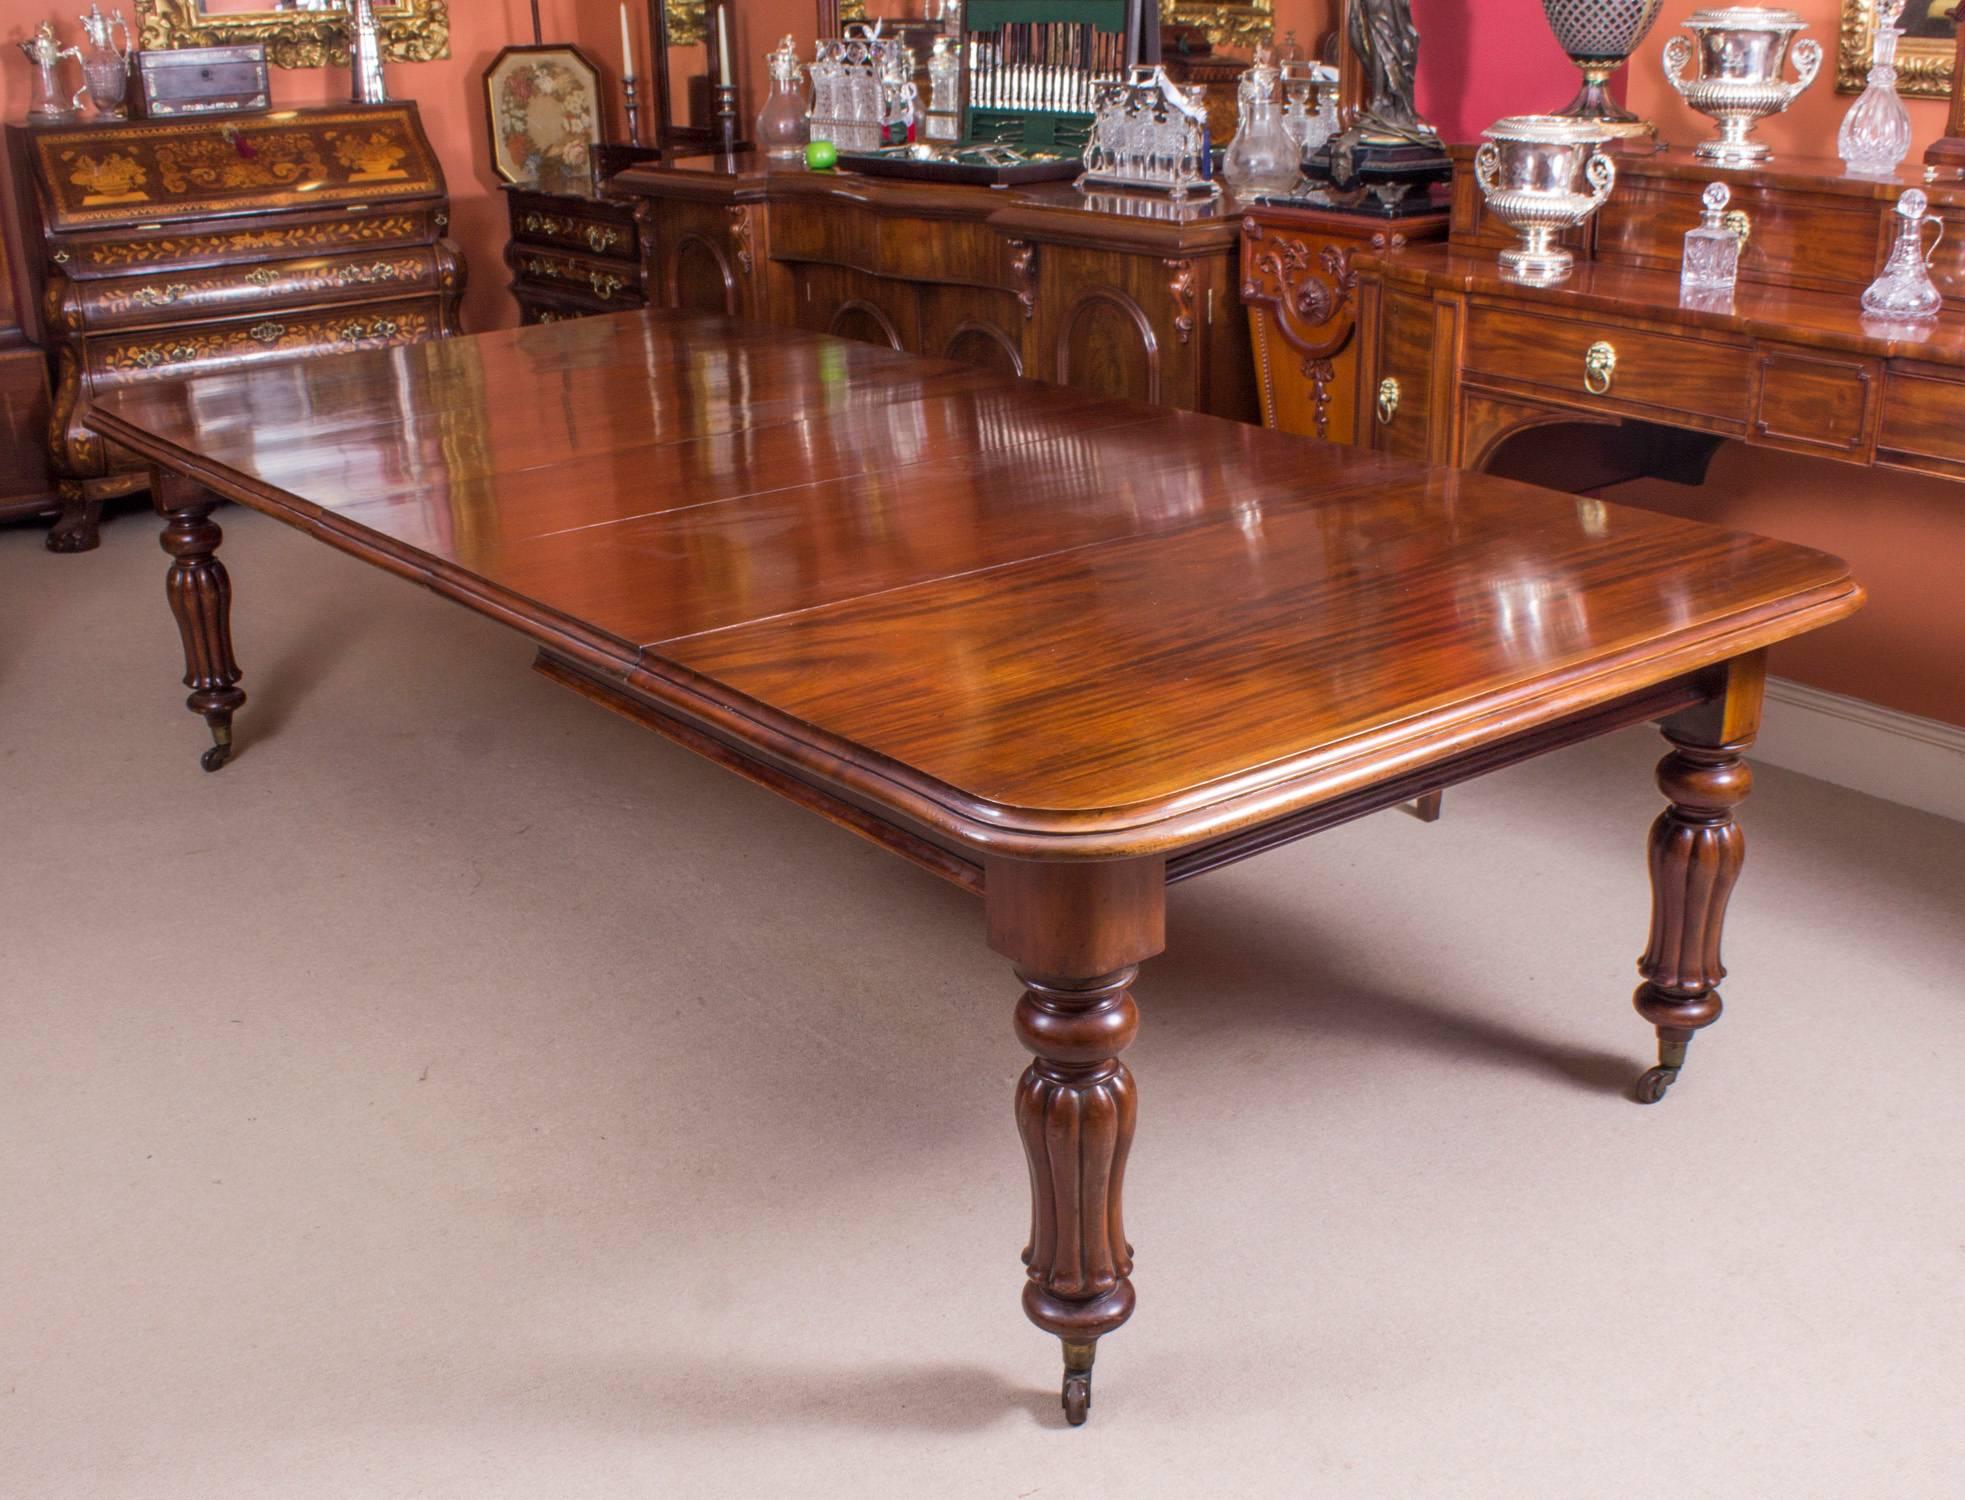 This is a fantastic dining set comprising of an antique William IV dining table, circa 1830 in date, with a vintage set of twelve balloon back dining chairs.

This beautiful table is in stunning flame mahogany and has three leaves of approximately